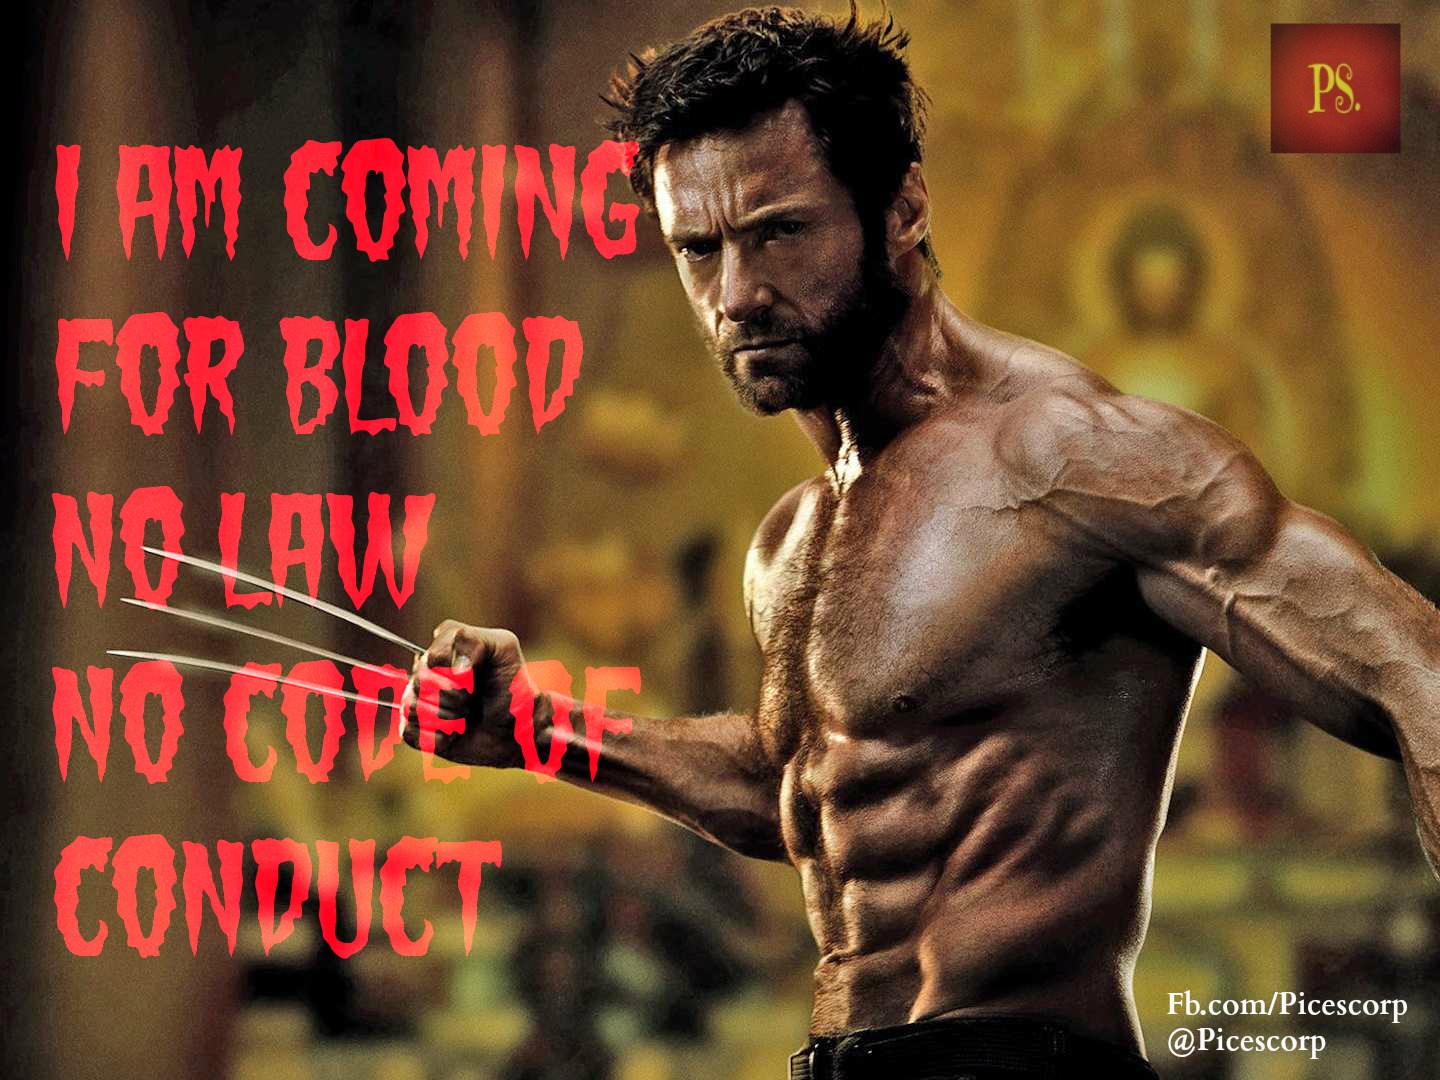 I am coming for Blood No Law No Code of Conduct